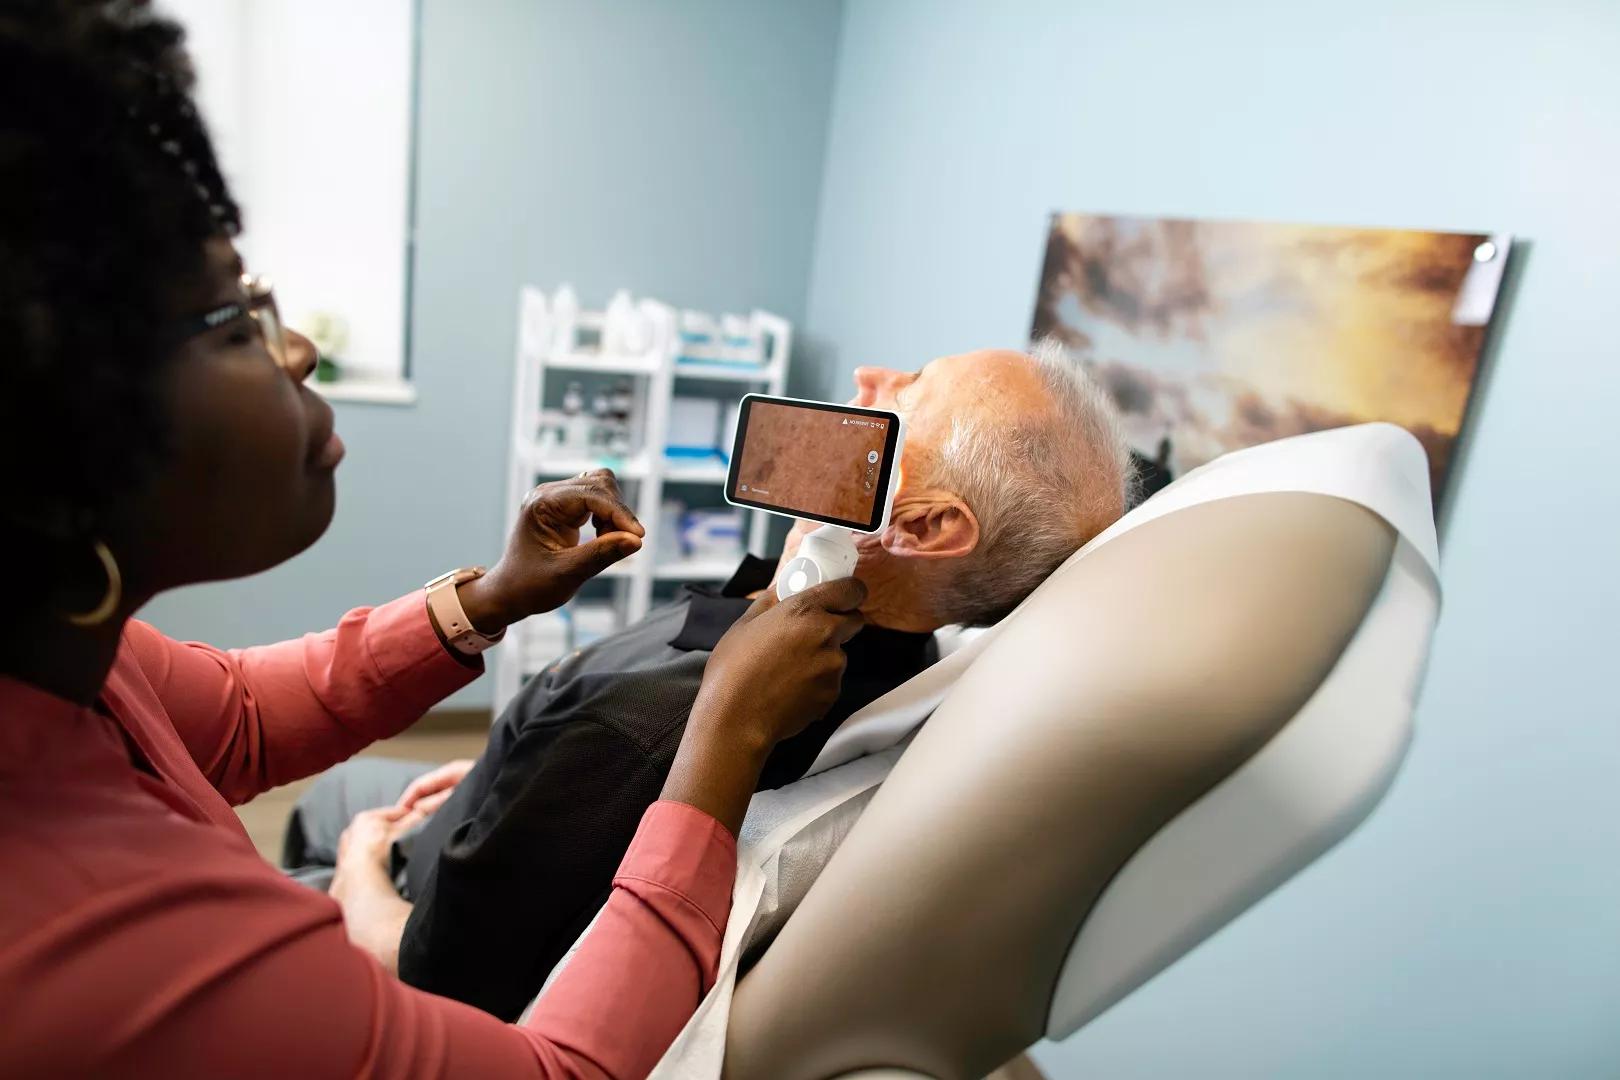 A dermatologist using the Demetra Scope to view a lesion on a patient's cheek